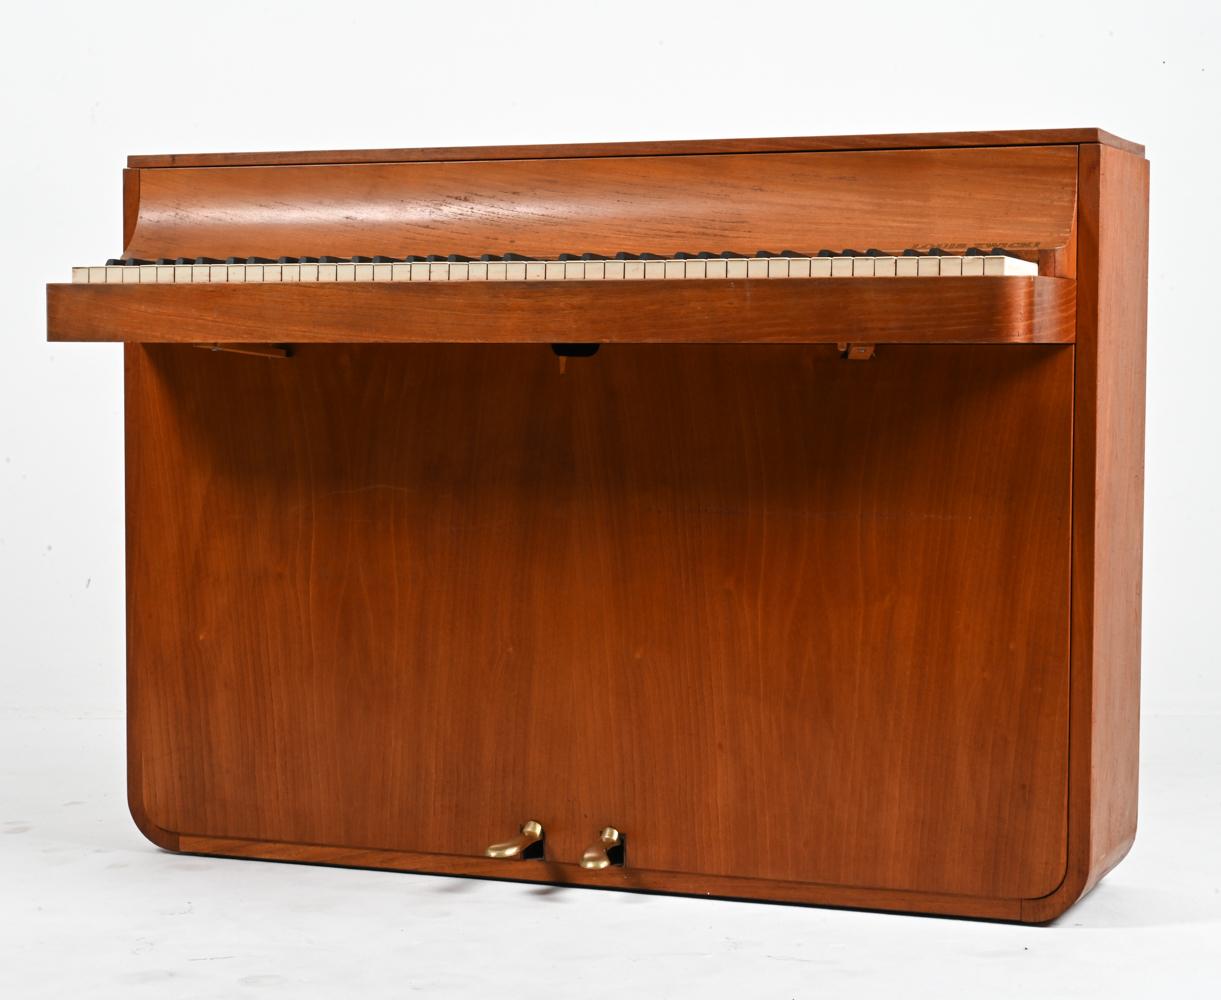 Step back in time with this masterfully-crafted Danish Mid-Century Teak Pianette by the renowned Louis Zwicki. From the heart of the 1960's, a period when design and craftsmanship merged in perfect harmony, this pianette encapsulates the very